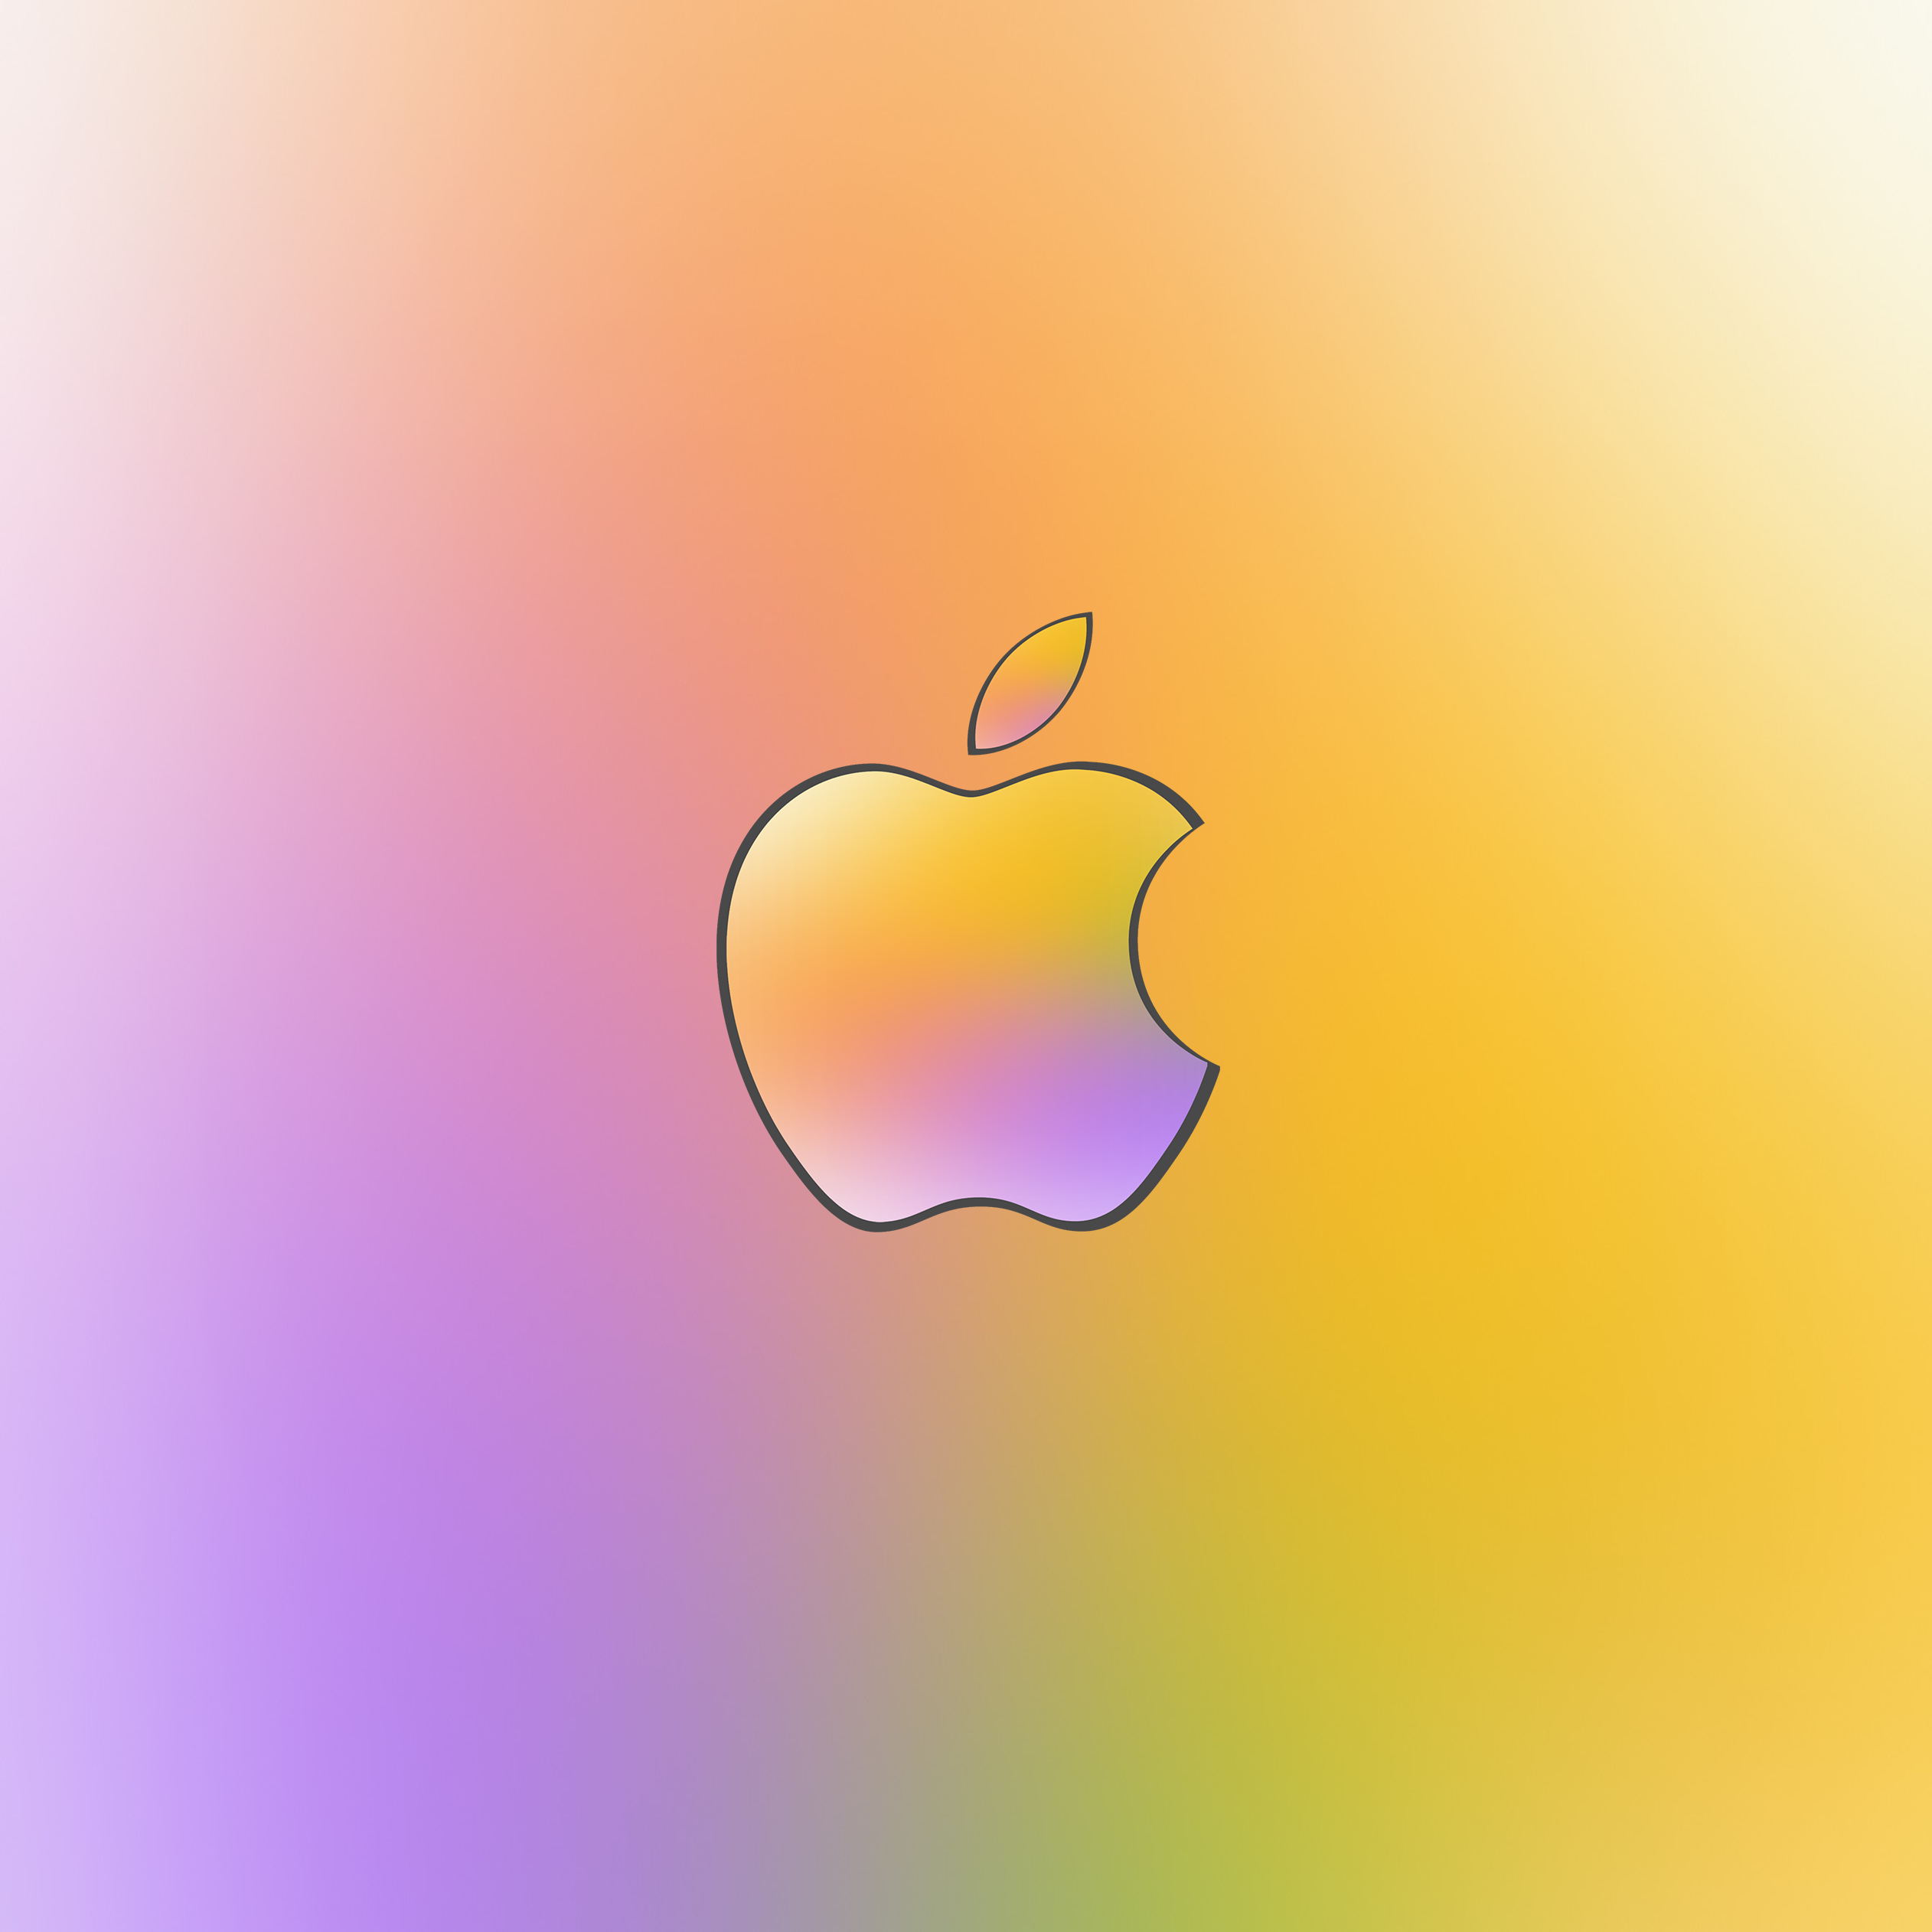 Download Apple Card wallpaper for iPhone and iPad